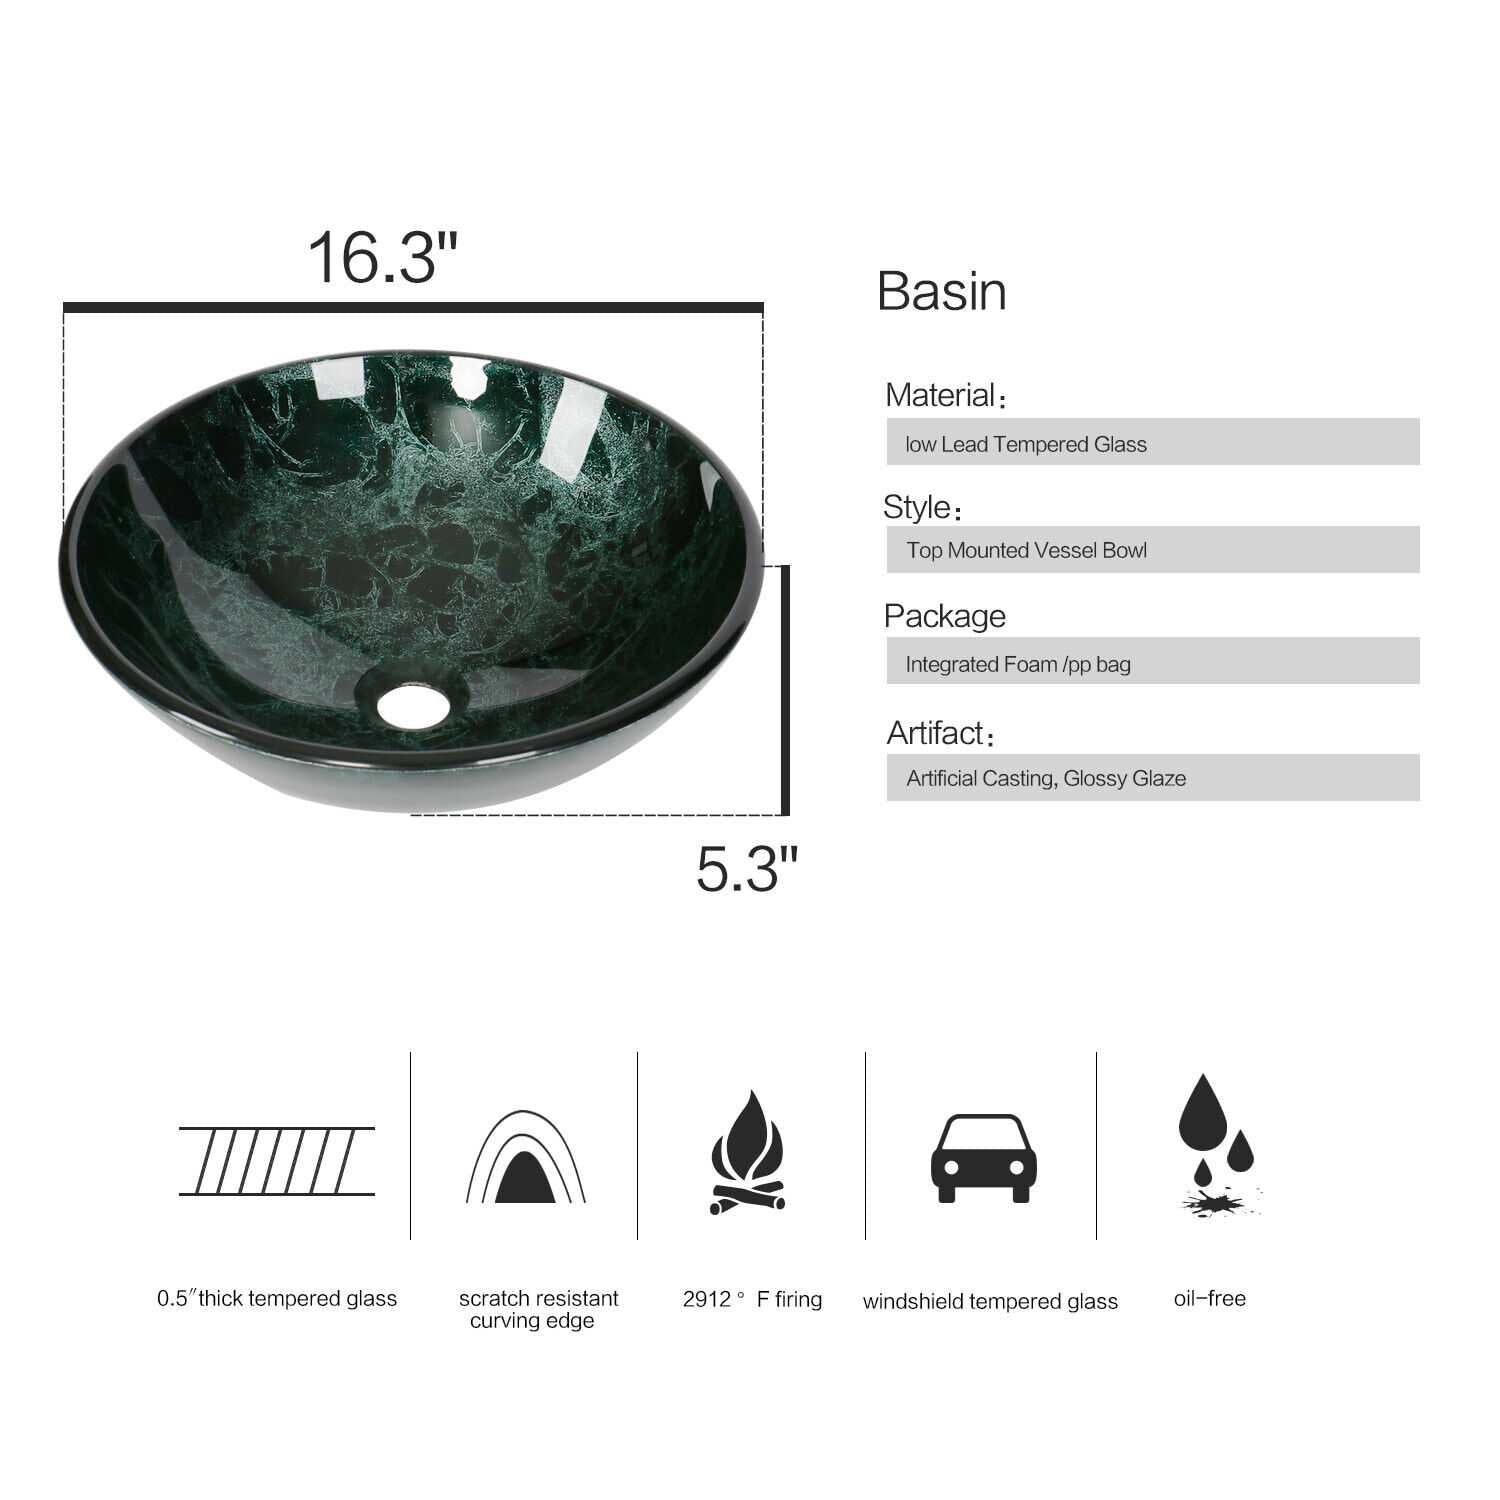 Elecwish round green sink basin size and description